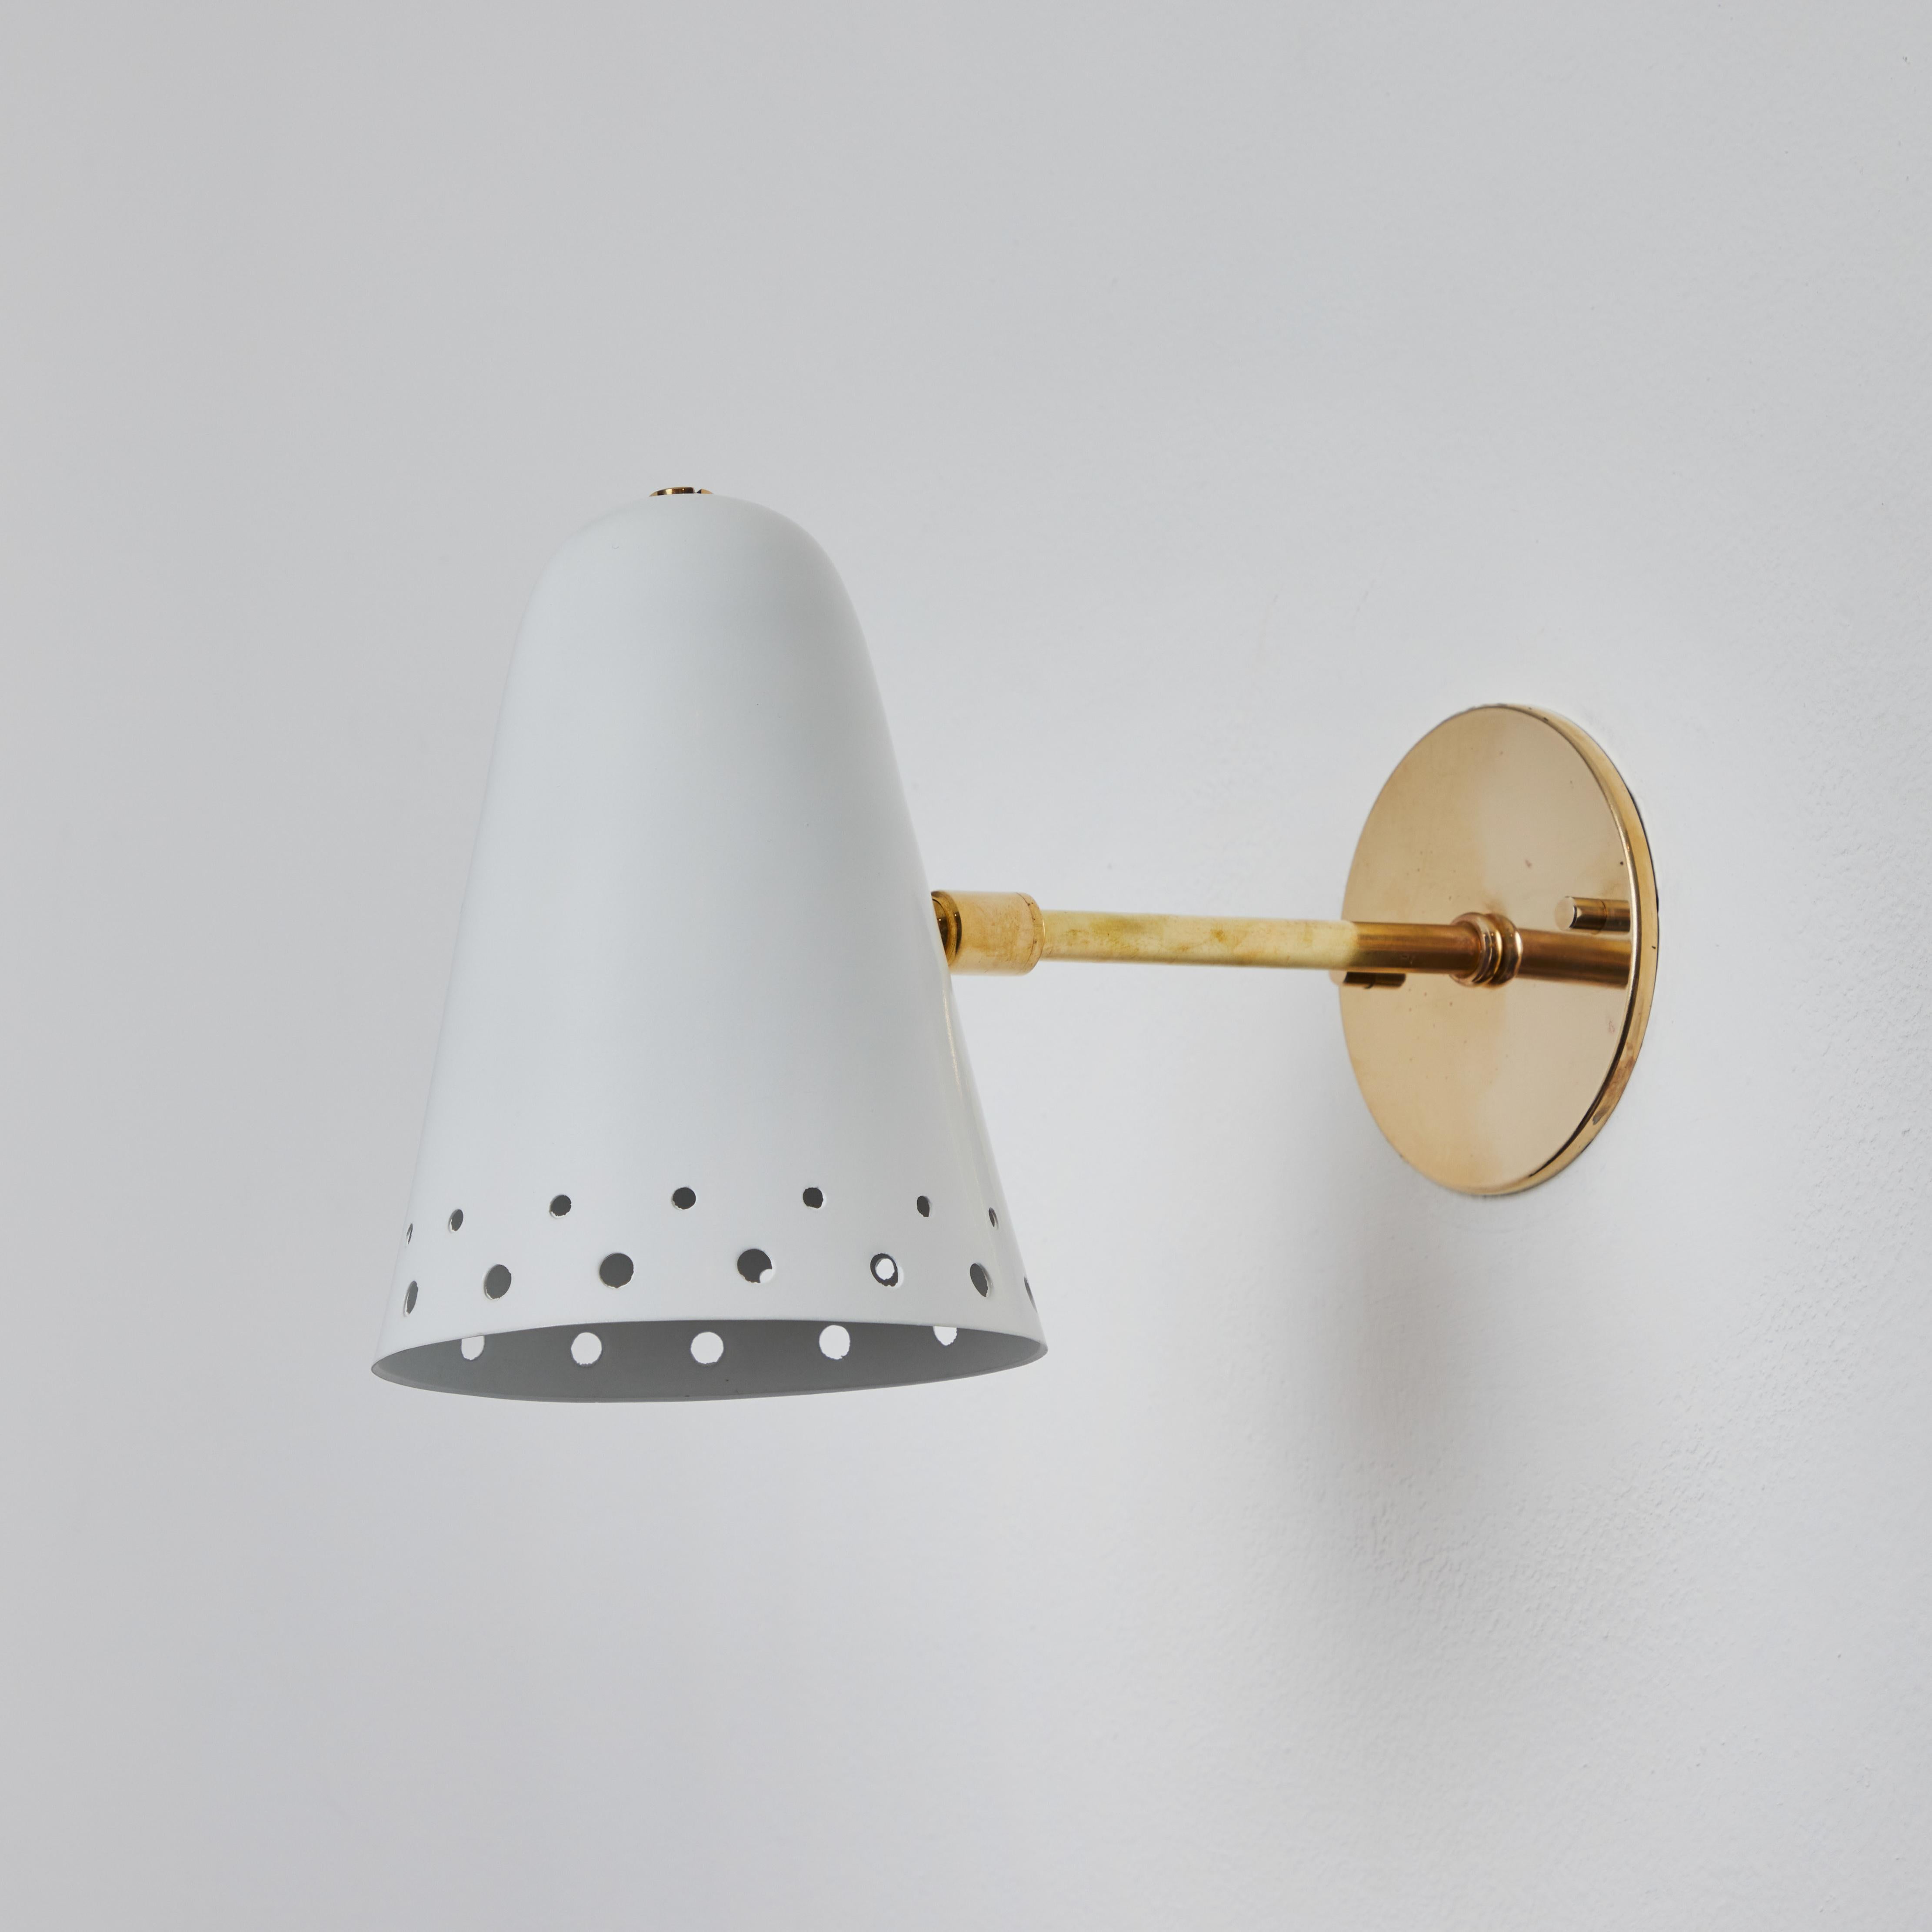 Rare 1950s Robert Mathieu Perforated White Metal and Brass Wall Sconce In Good Condition For Sale In Glendale, CA